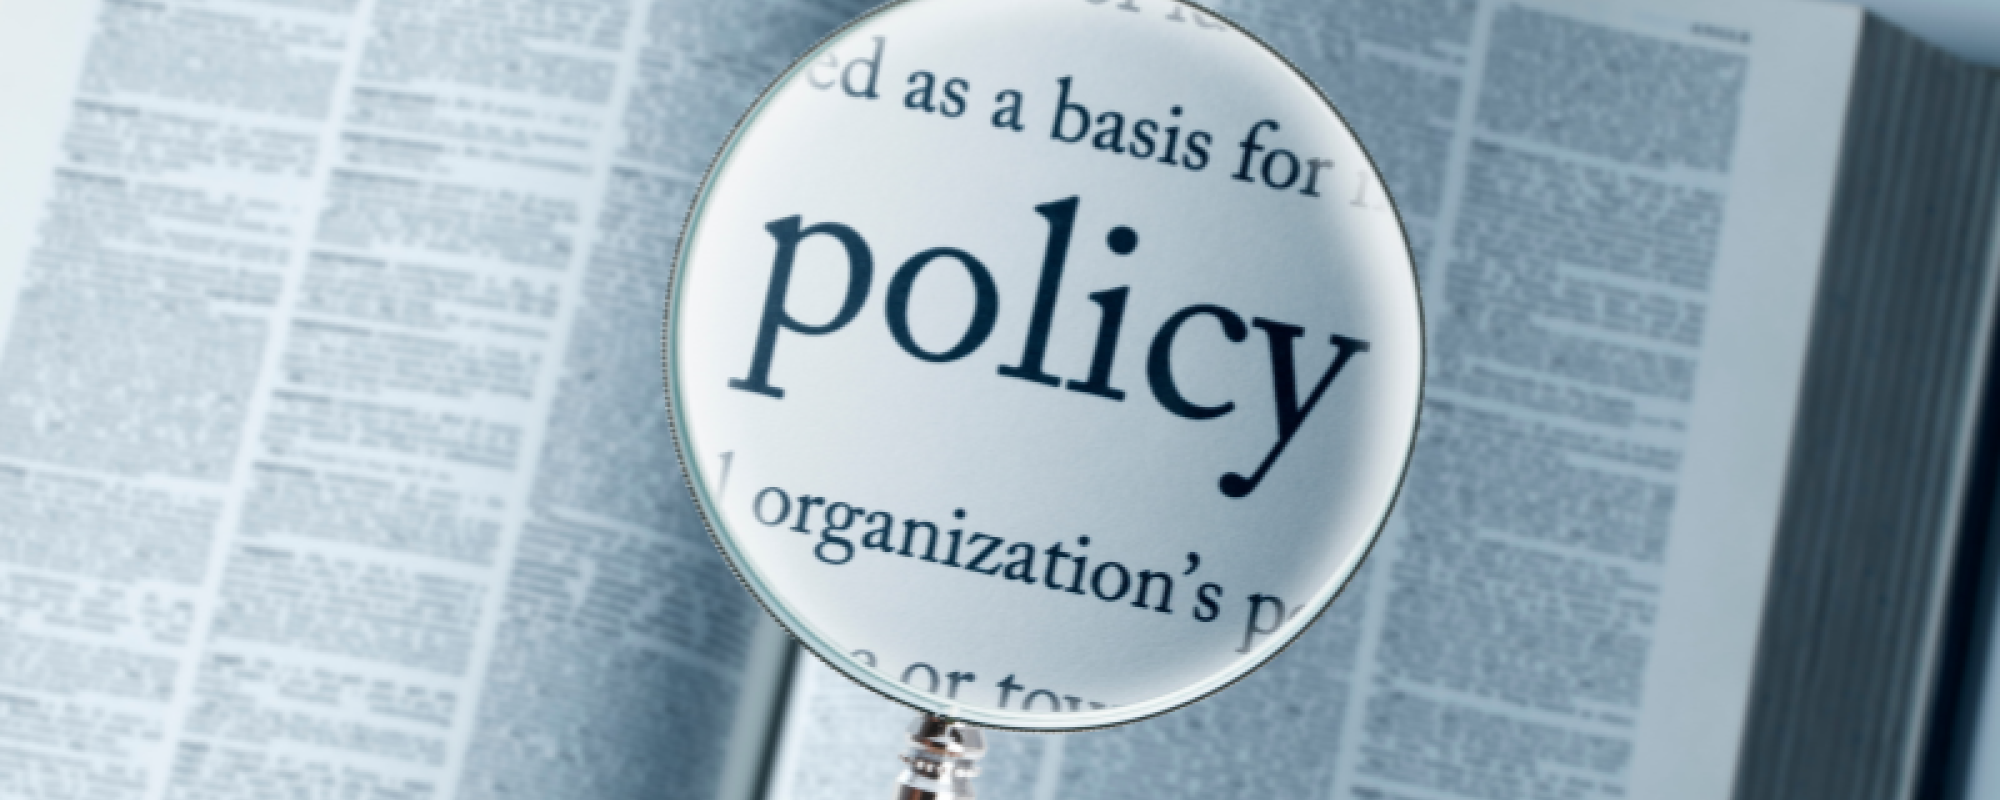 Policy Finder